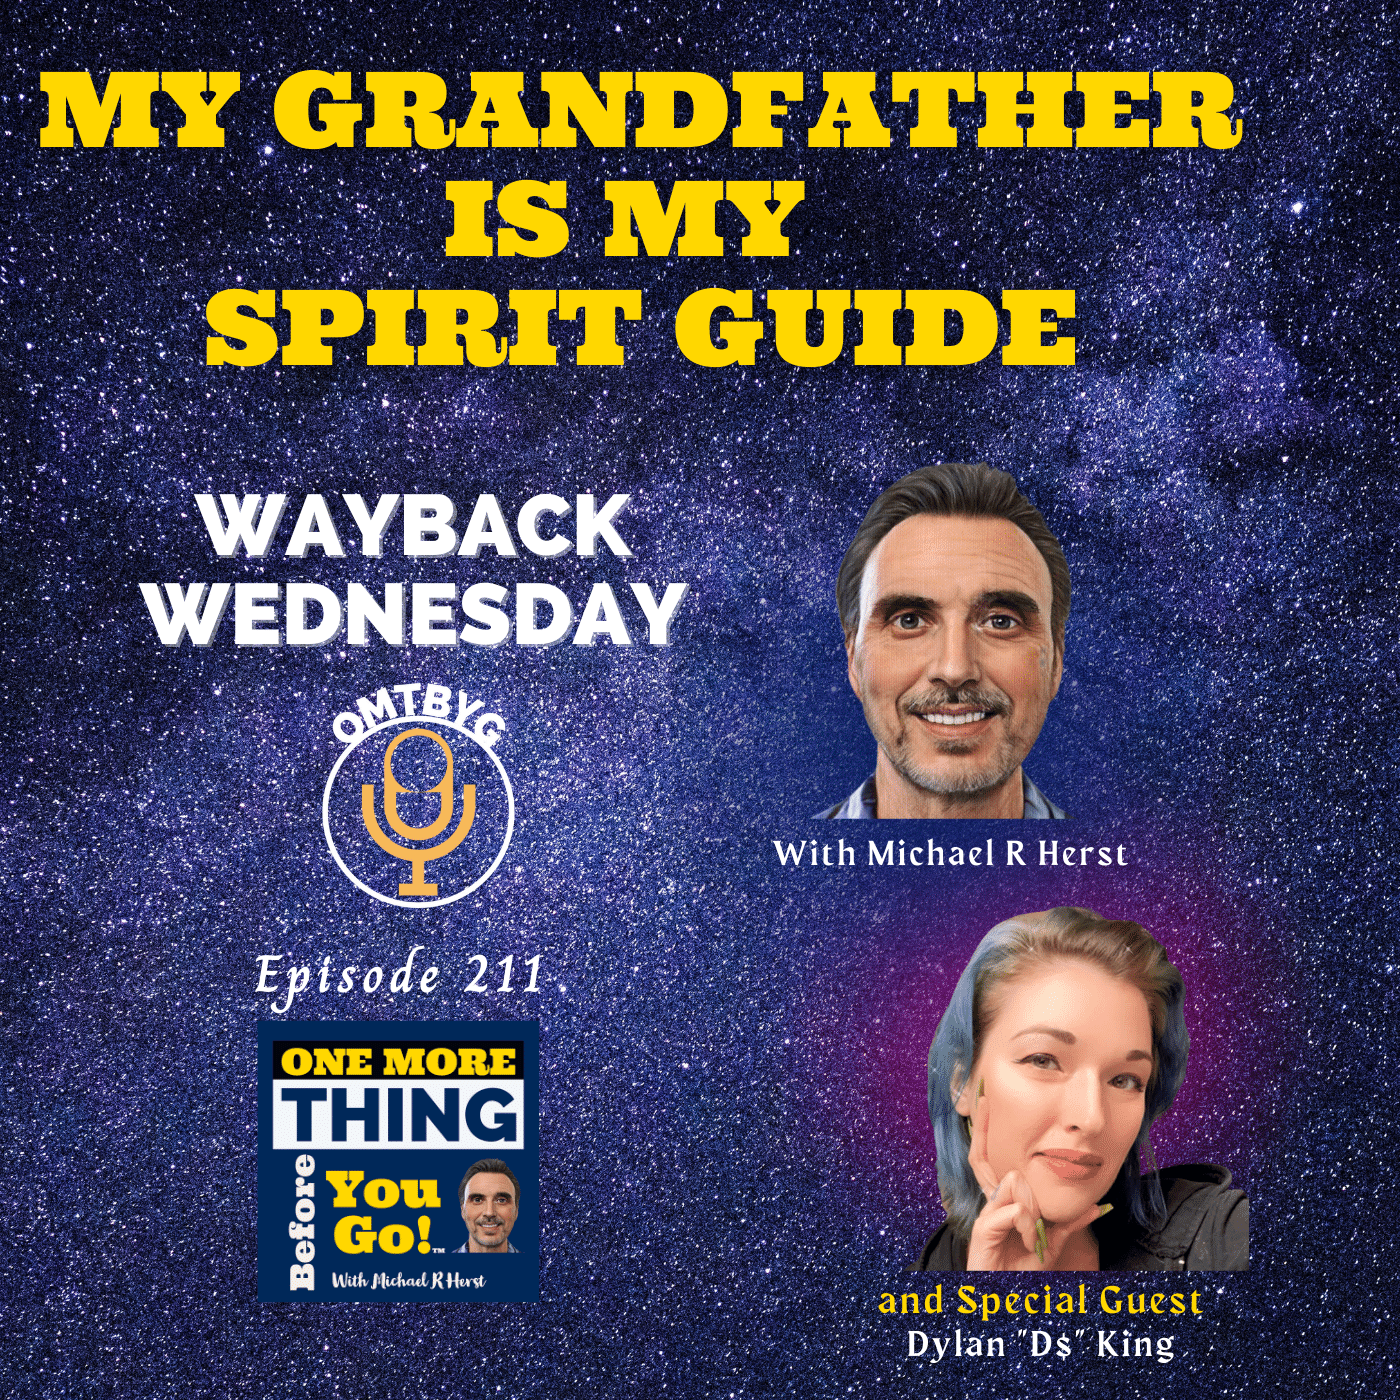 My Grandfather is My Spirit Guide - Wayback Wednesday